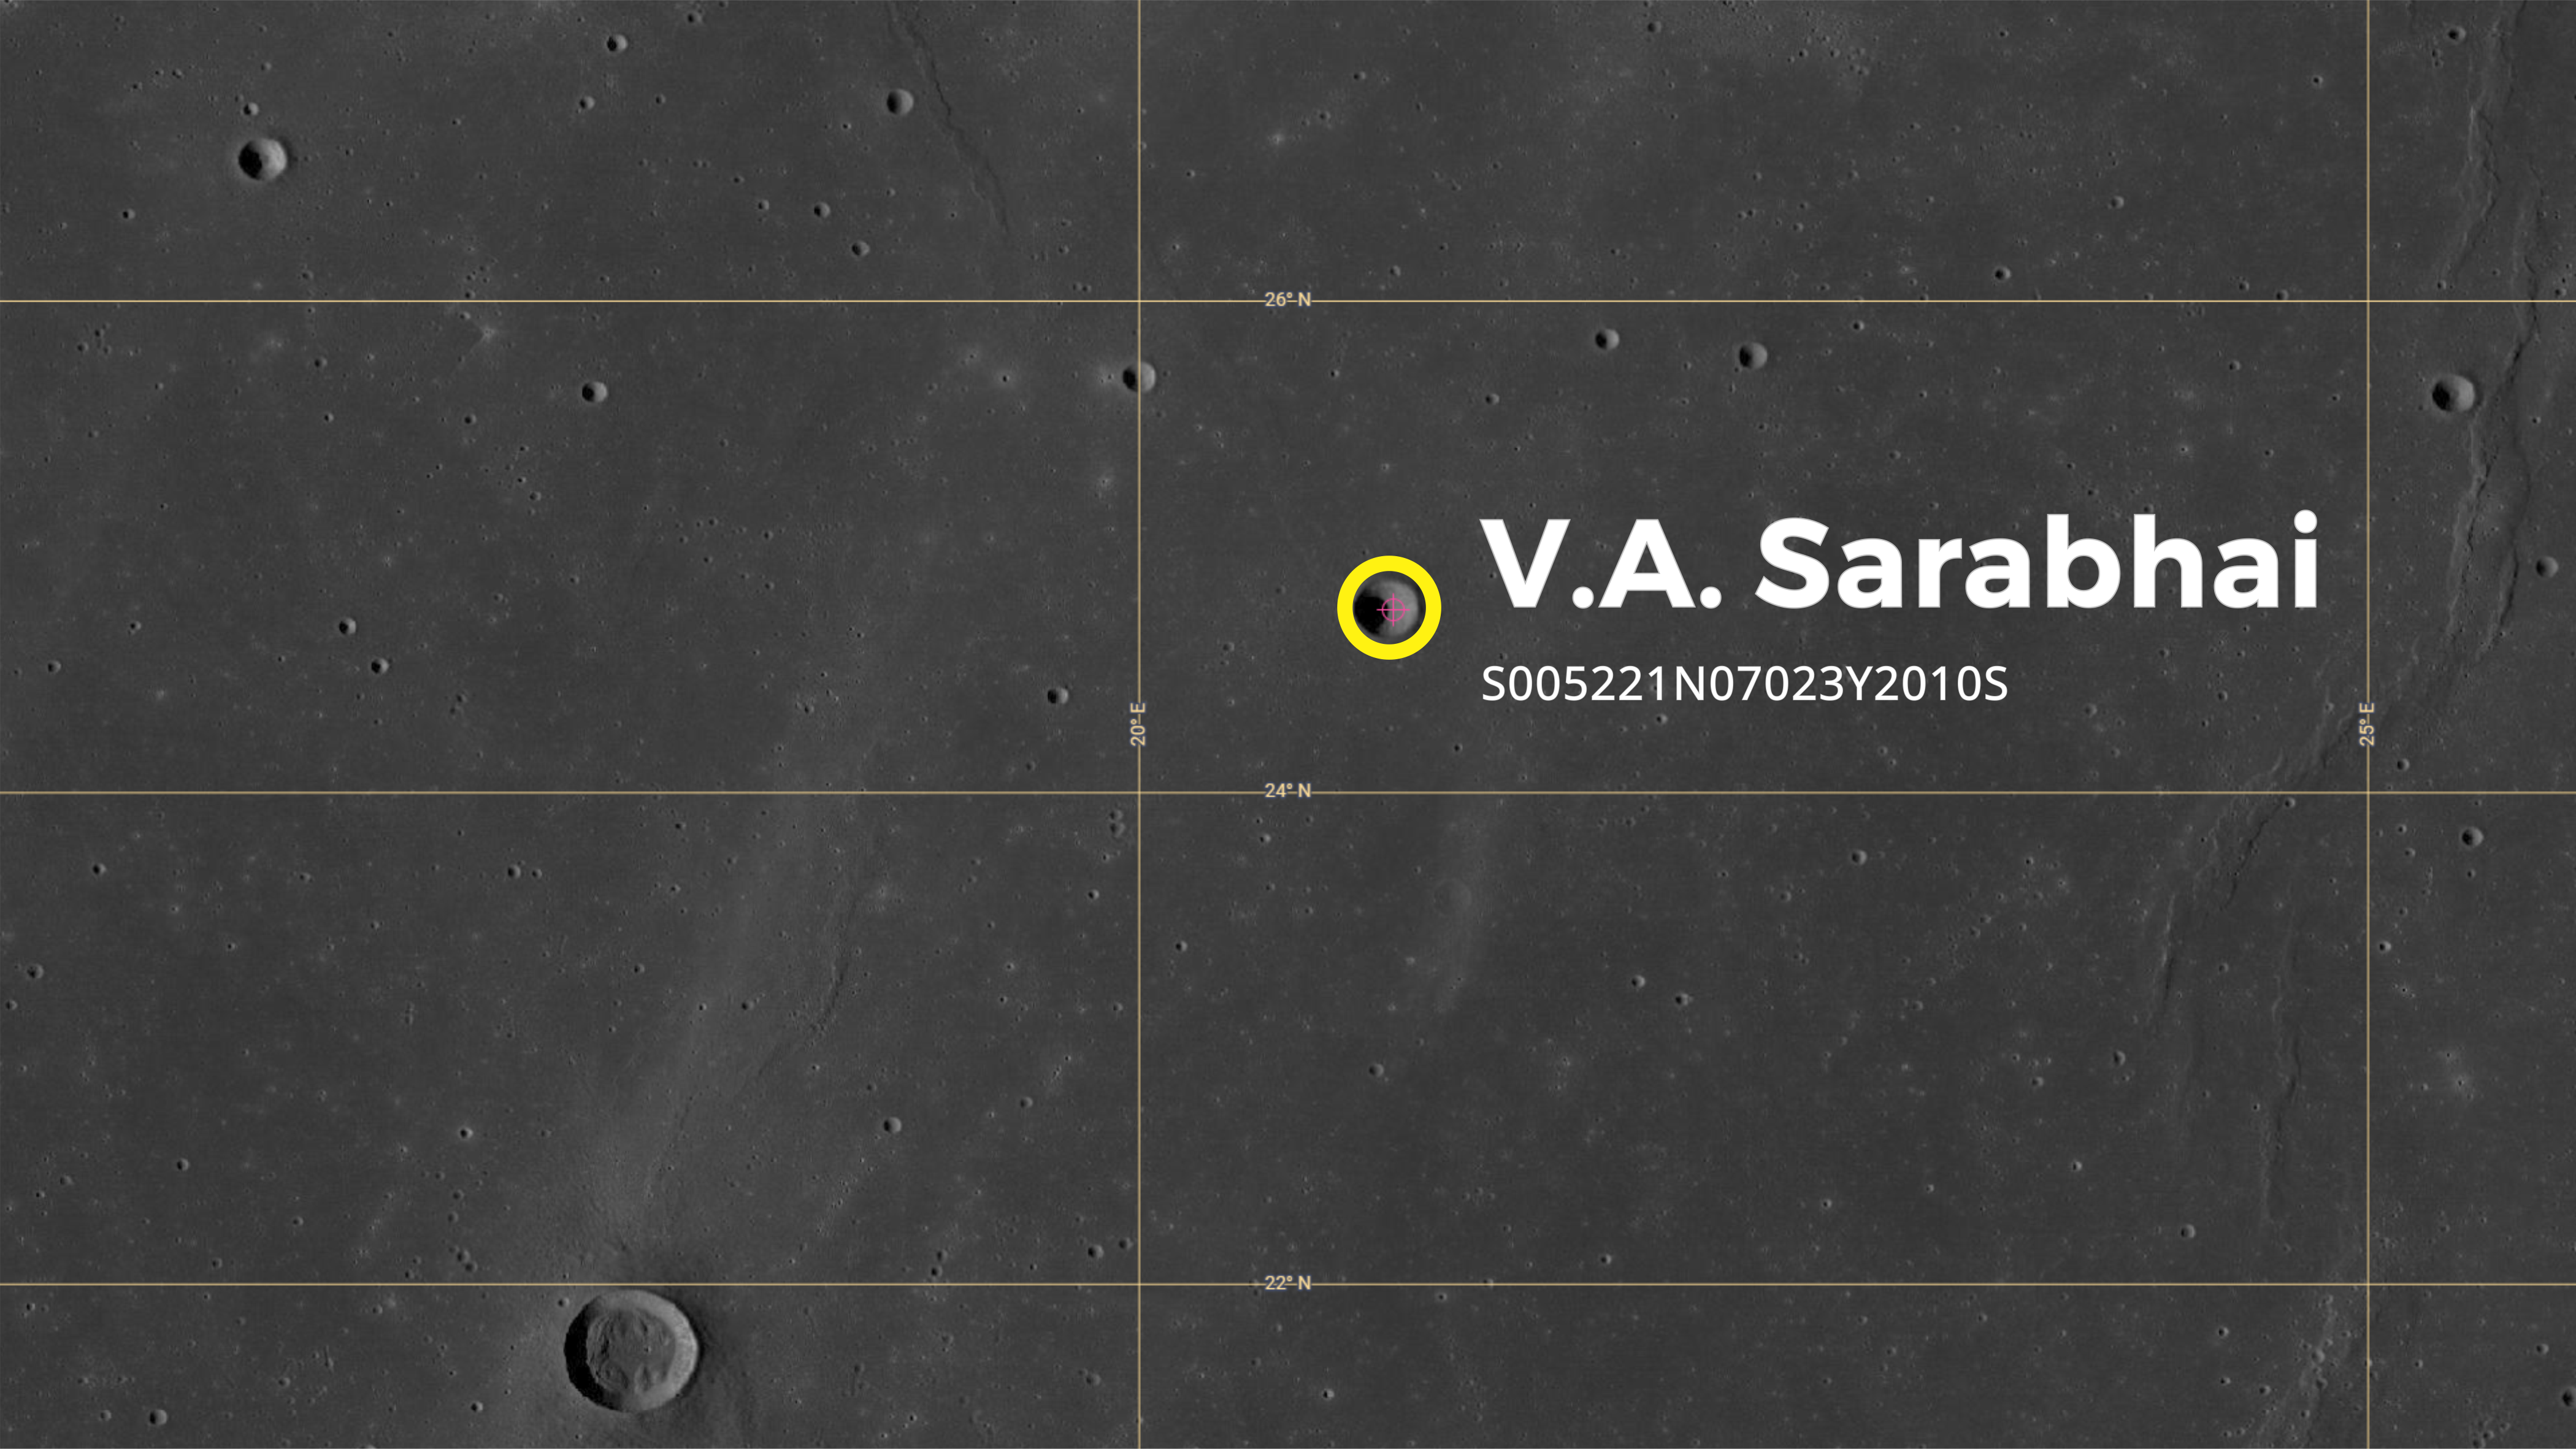 Crater V.A. Sarabhai on the Moon (Image)